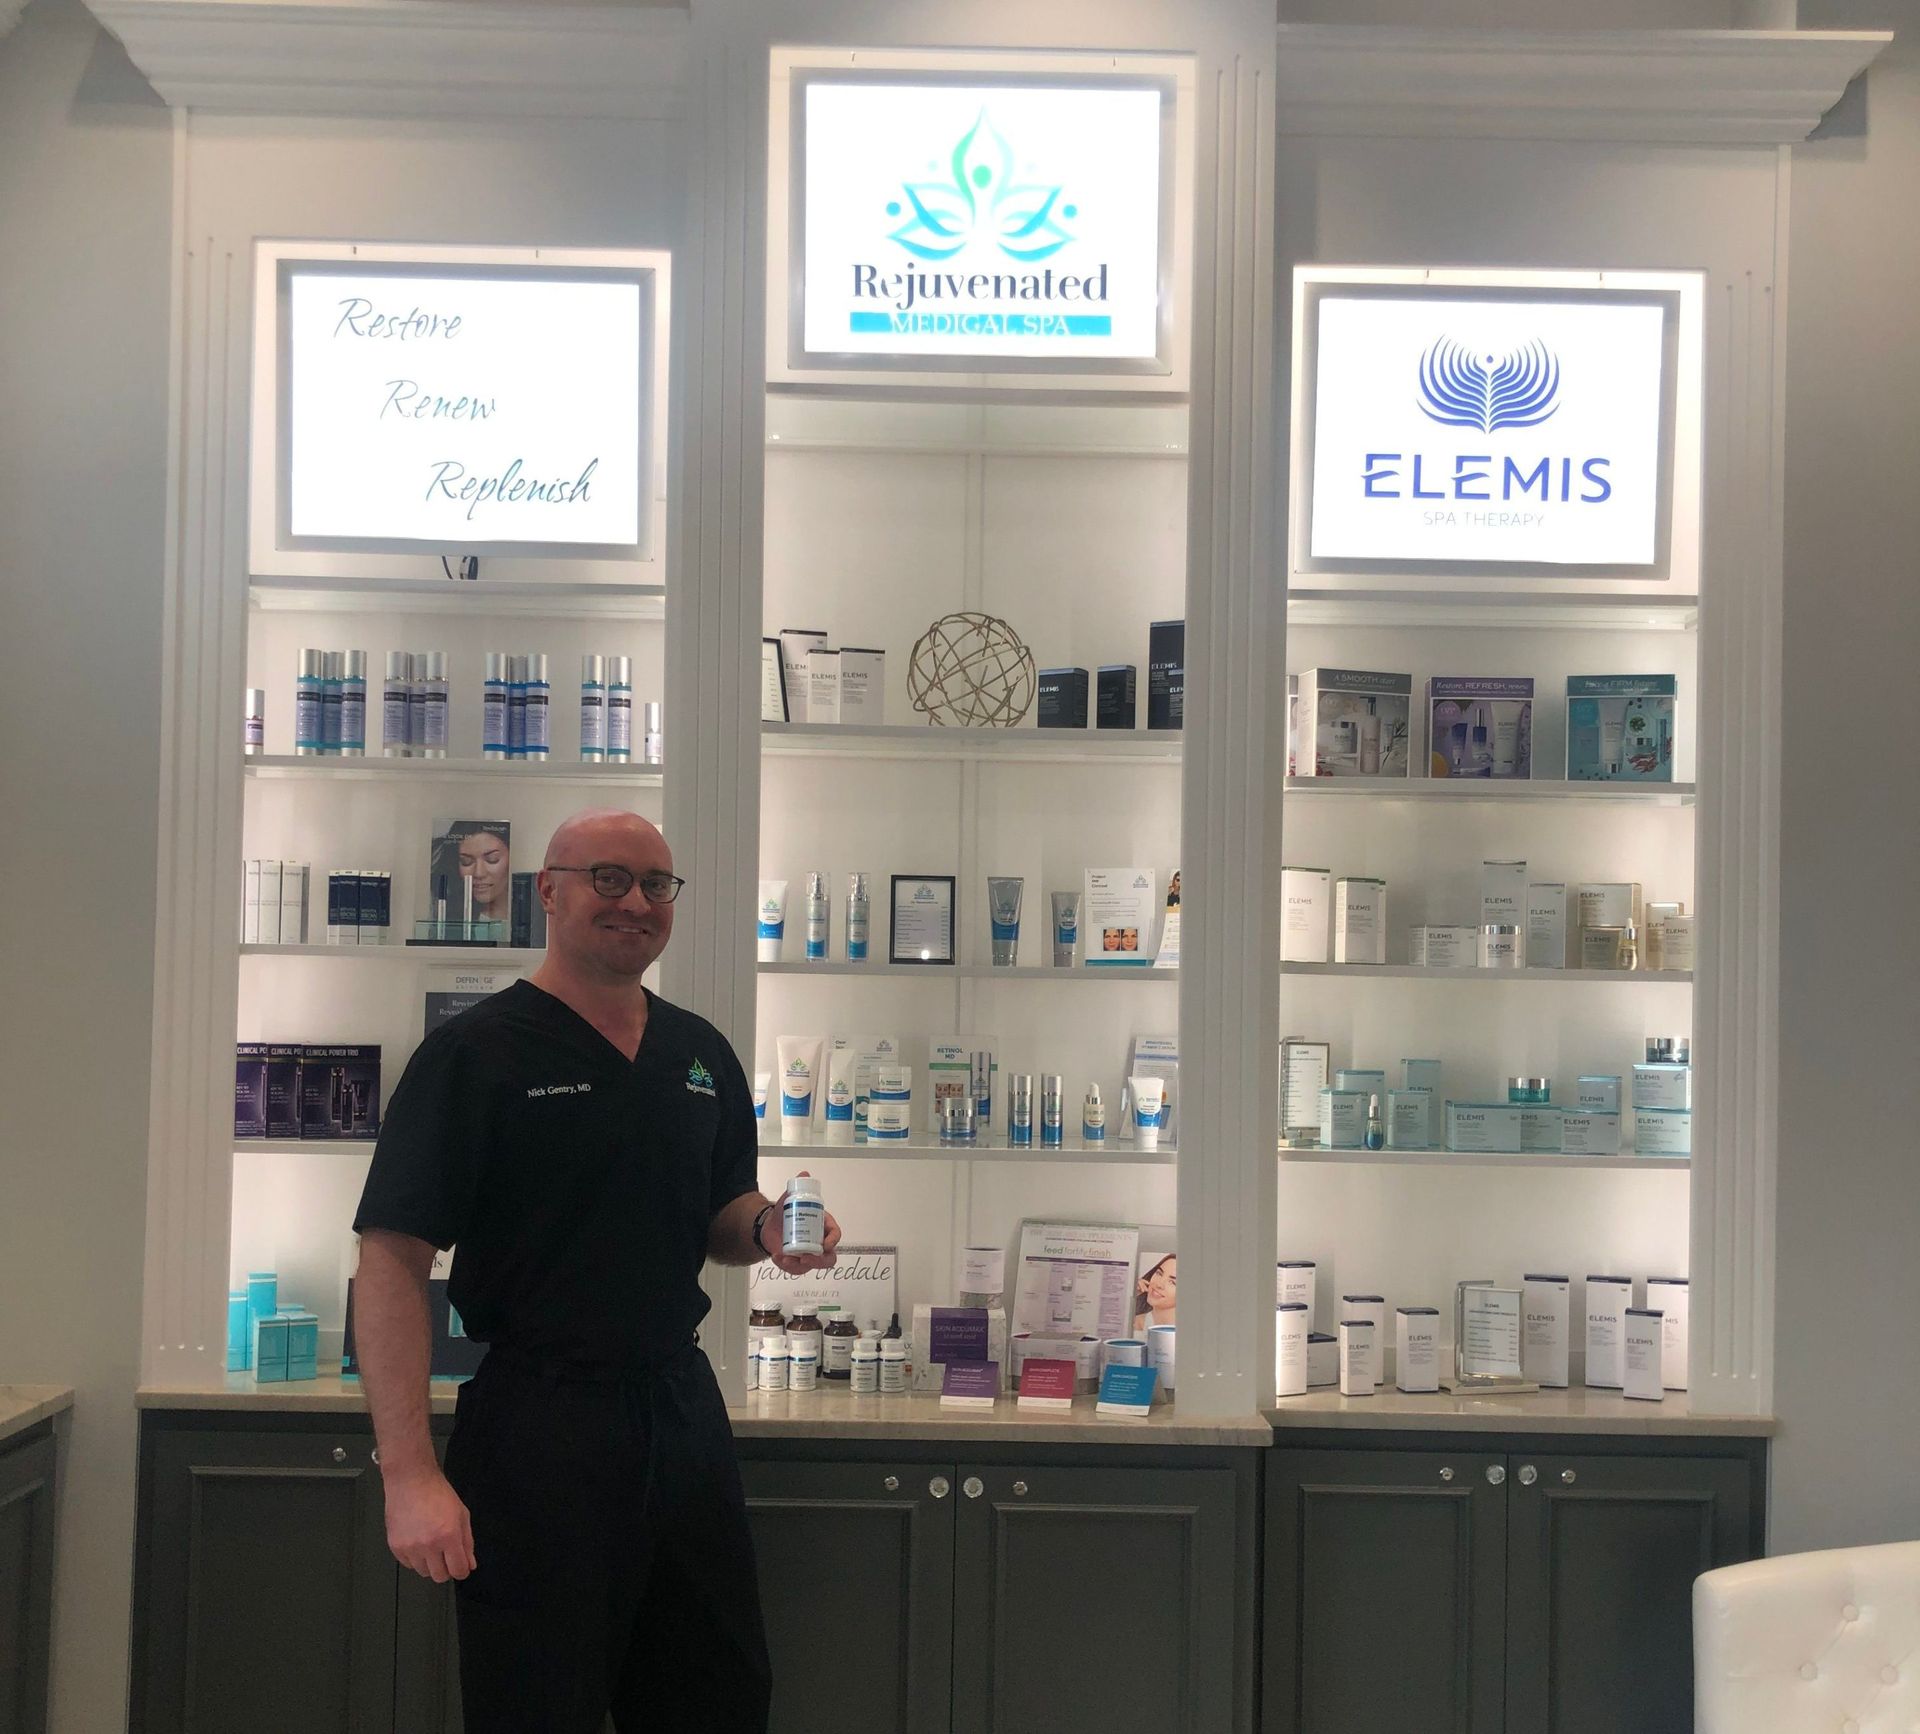 A man stands in front of a display of elemis products